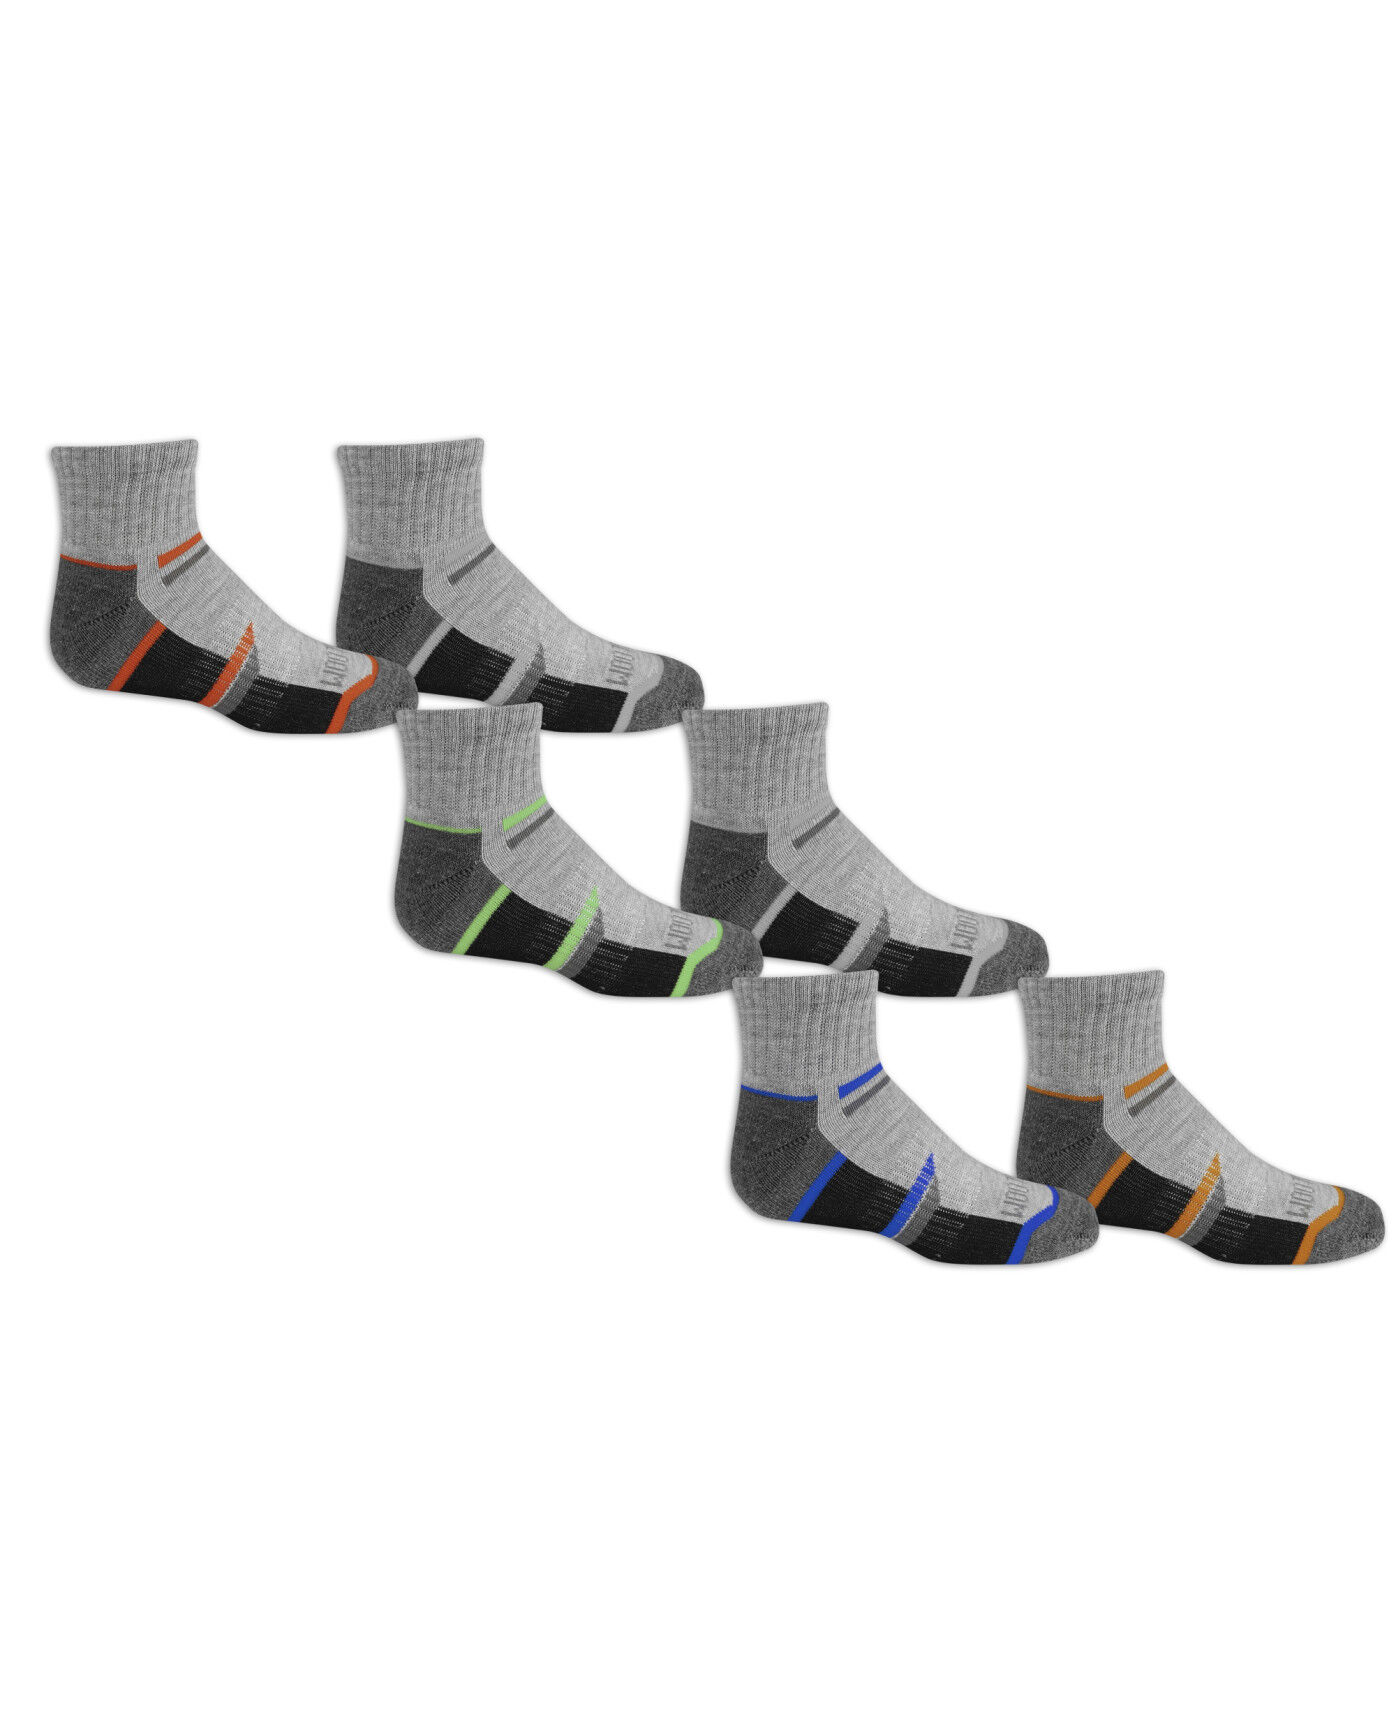 Fruit Of The Loom Boys Ankle Socks Size Chart